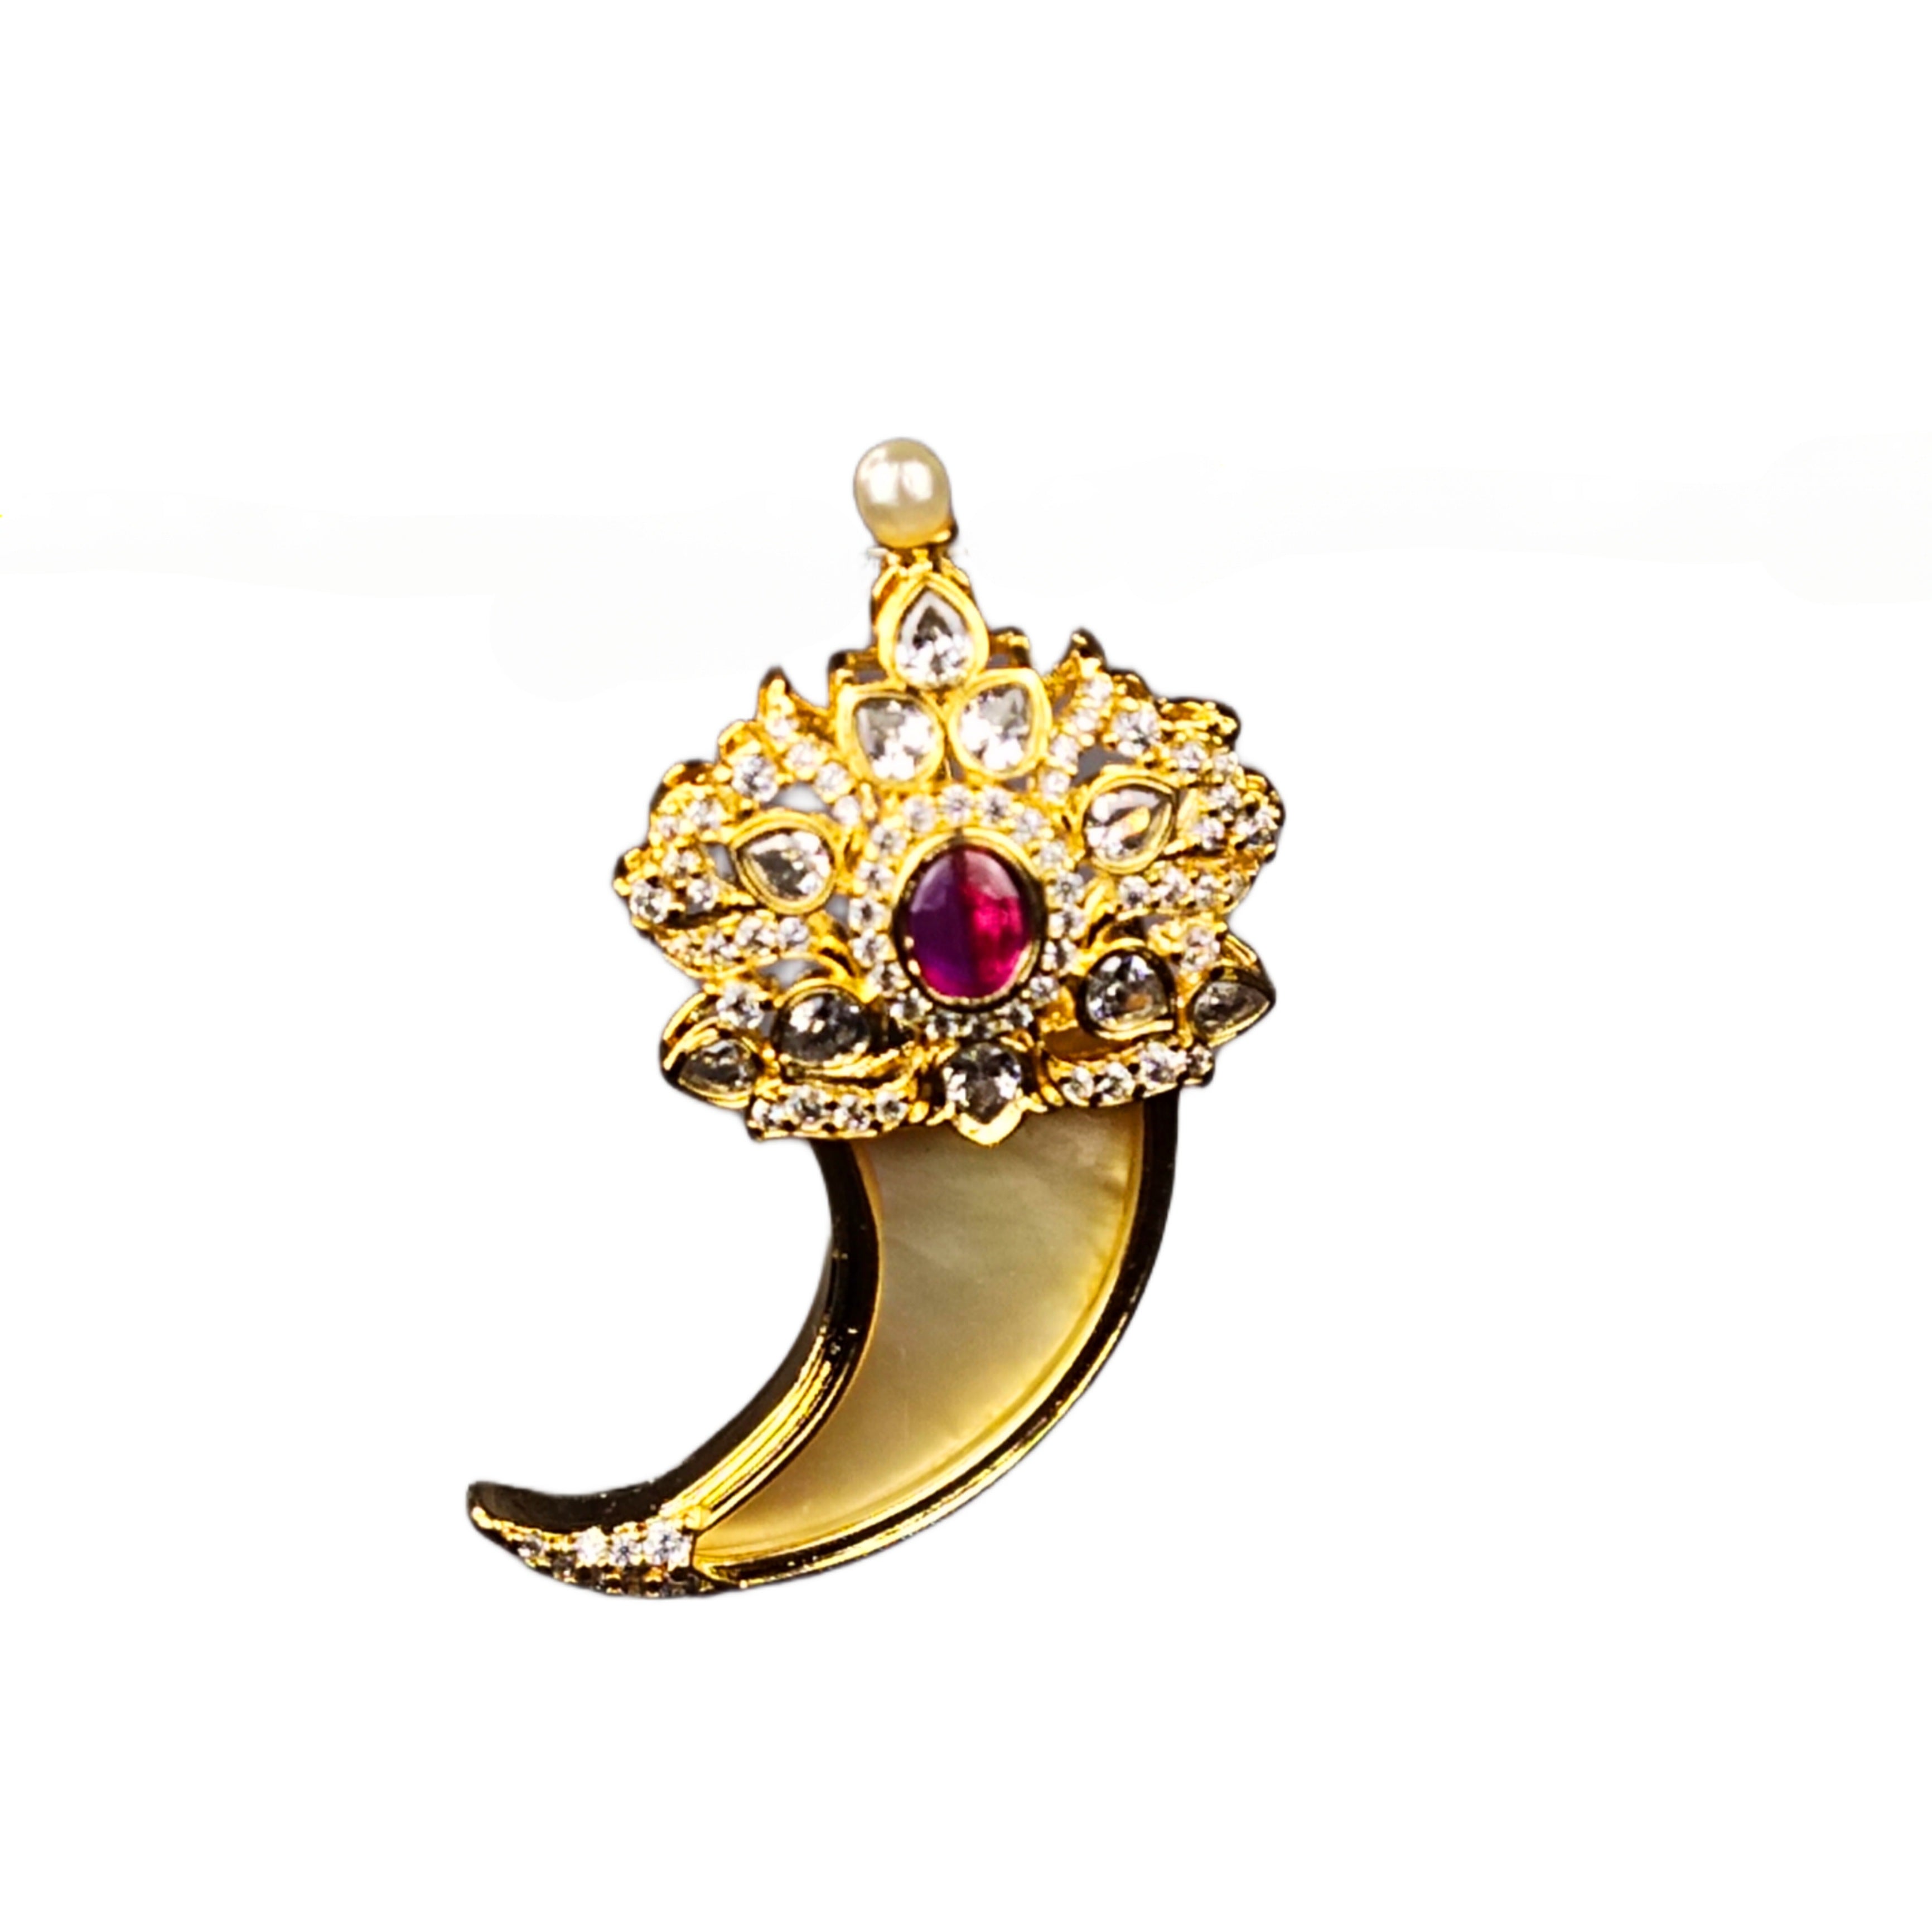 Lion In Artificial Daul Lion Nail Exquisite Design Gold Plated Pendant -  Style A812, Fashionable Pendant, फैशन पेंडेंट - Soni Fashion, Rajkot | ID:  26008997997